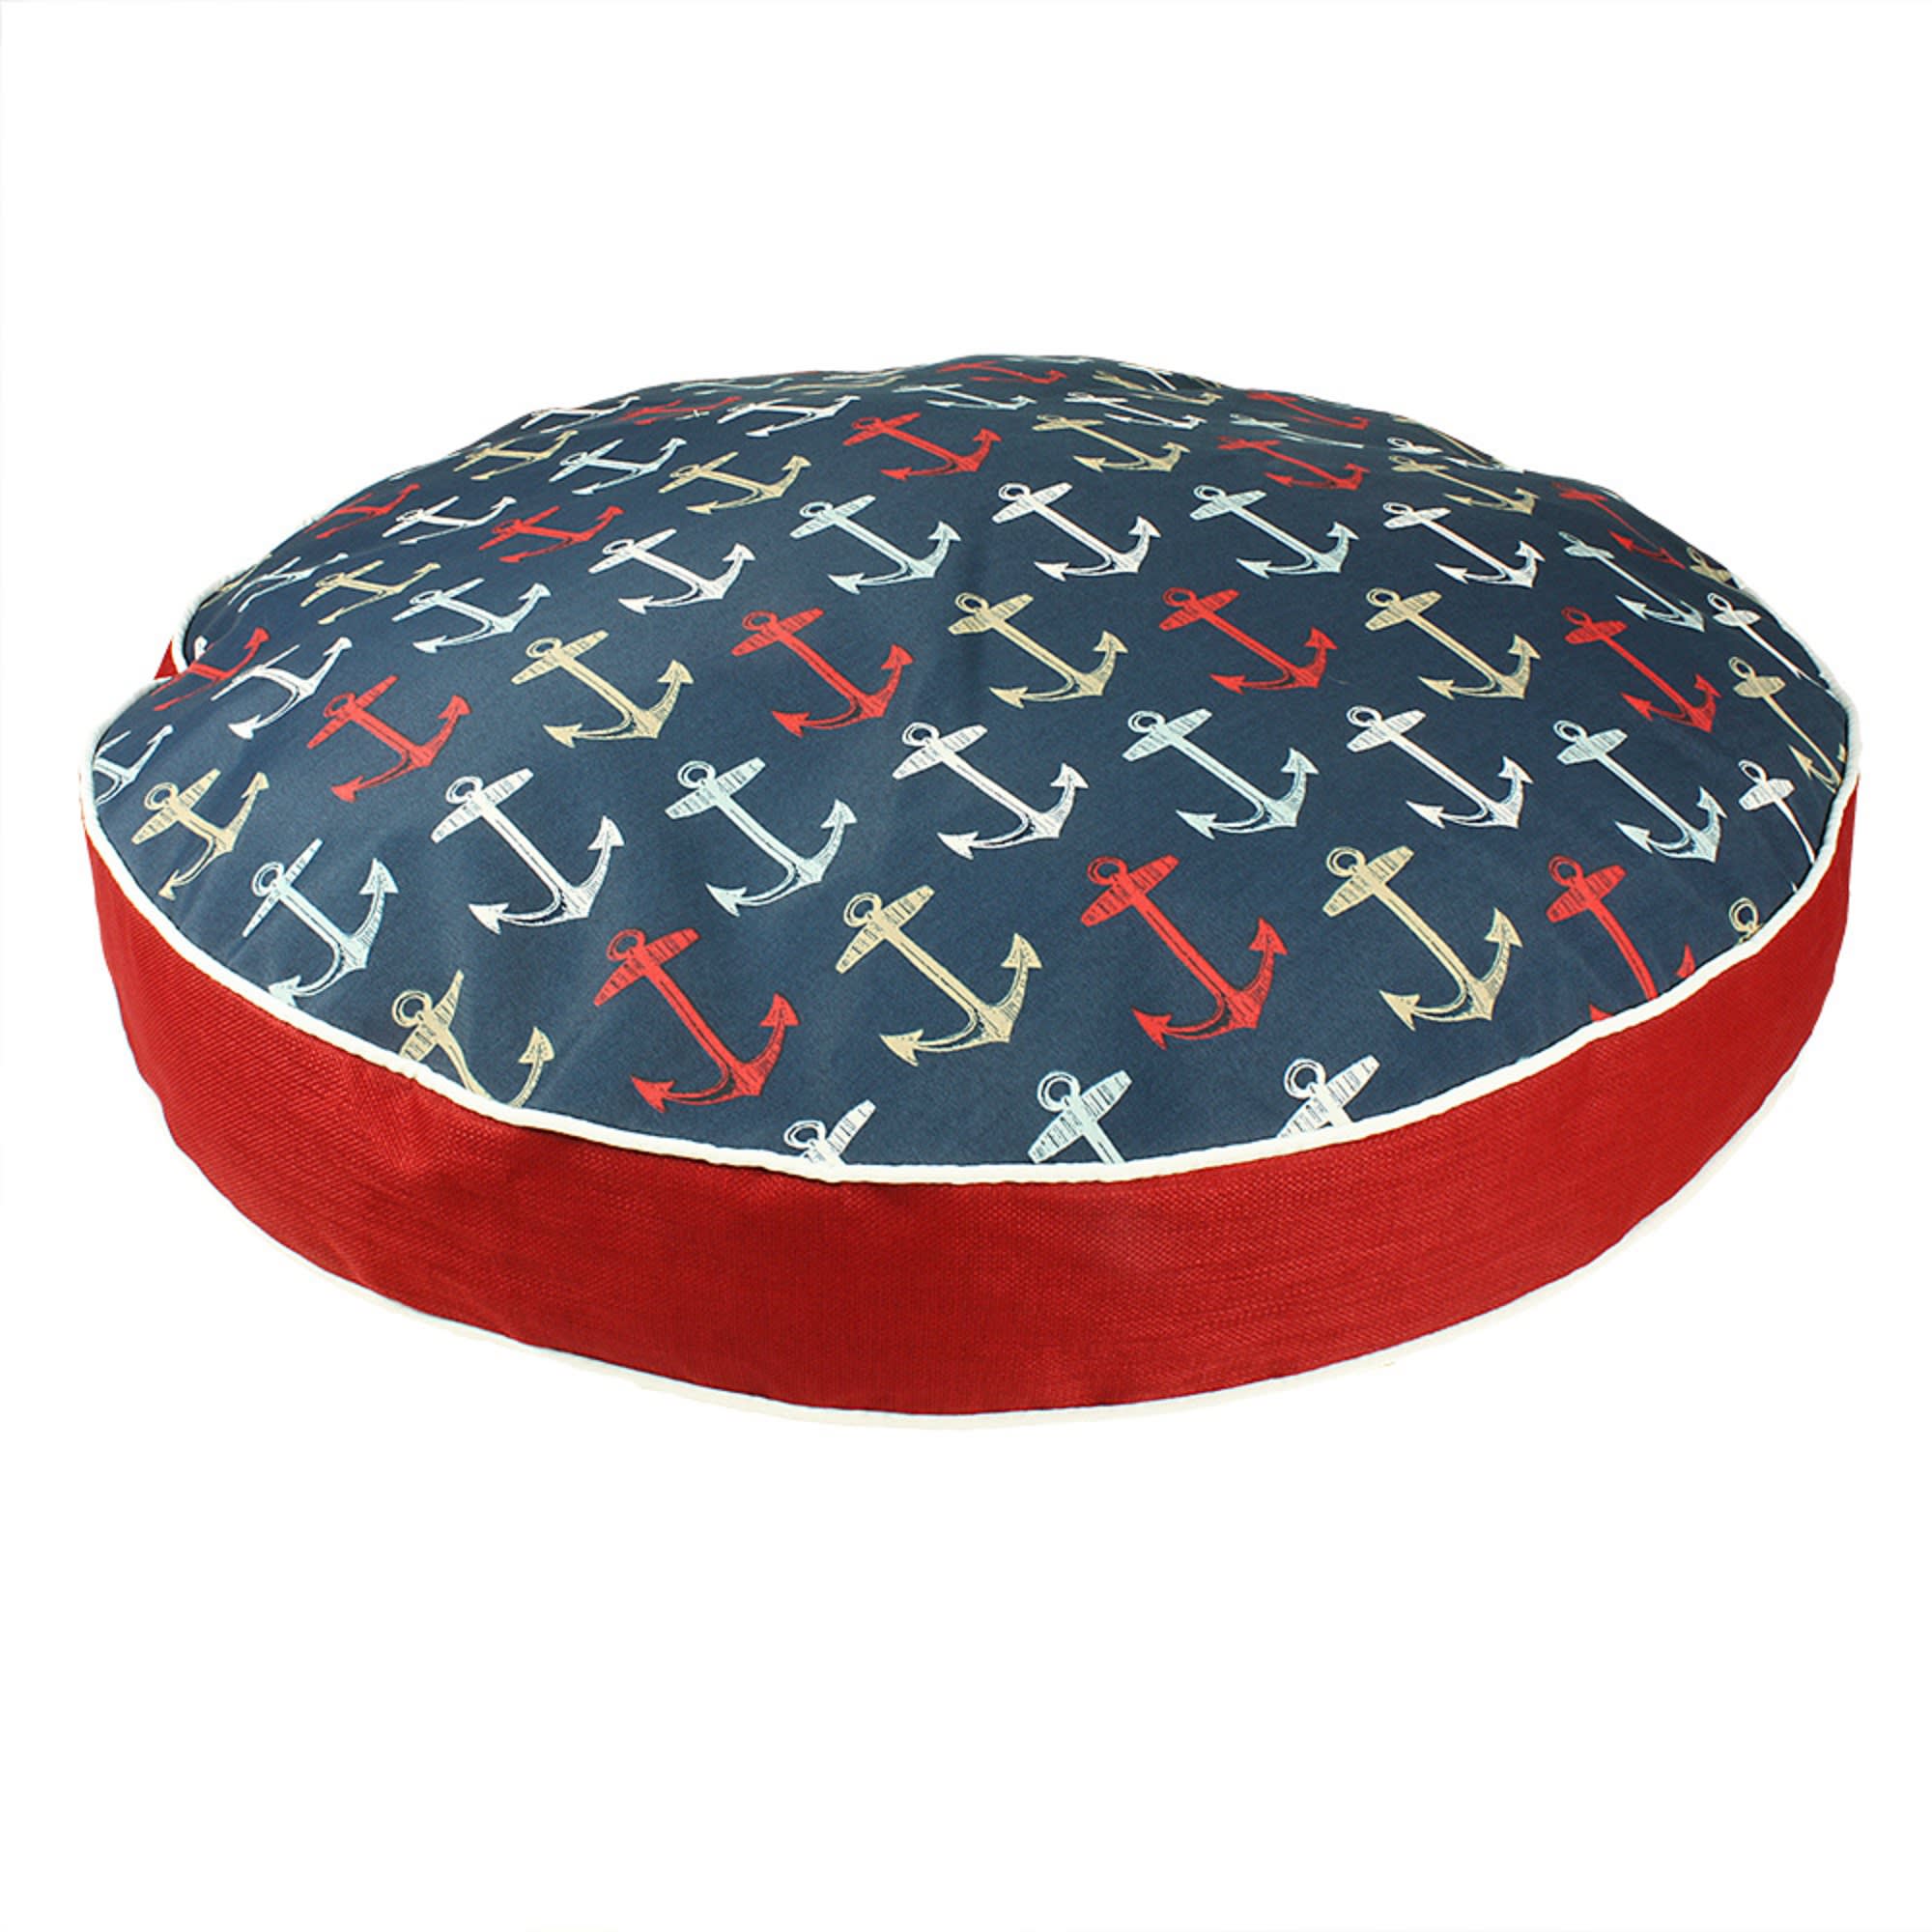 Snoozer Indoor Outdoor Round Dog Bed in Anchor Pattern, 51